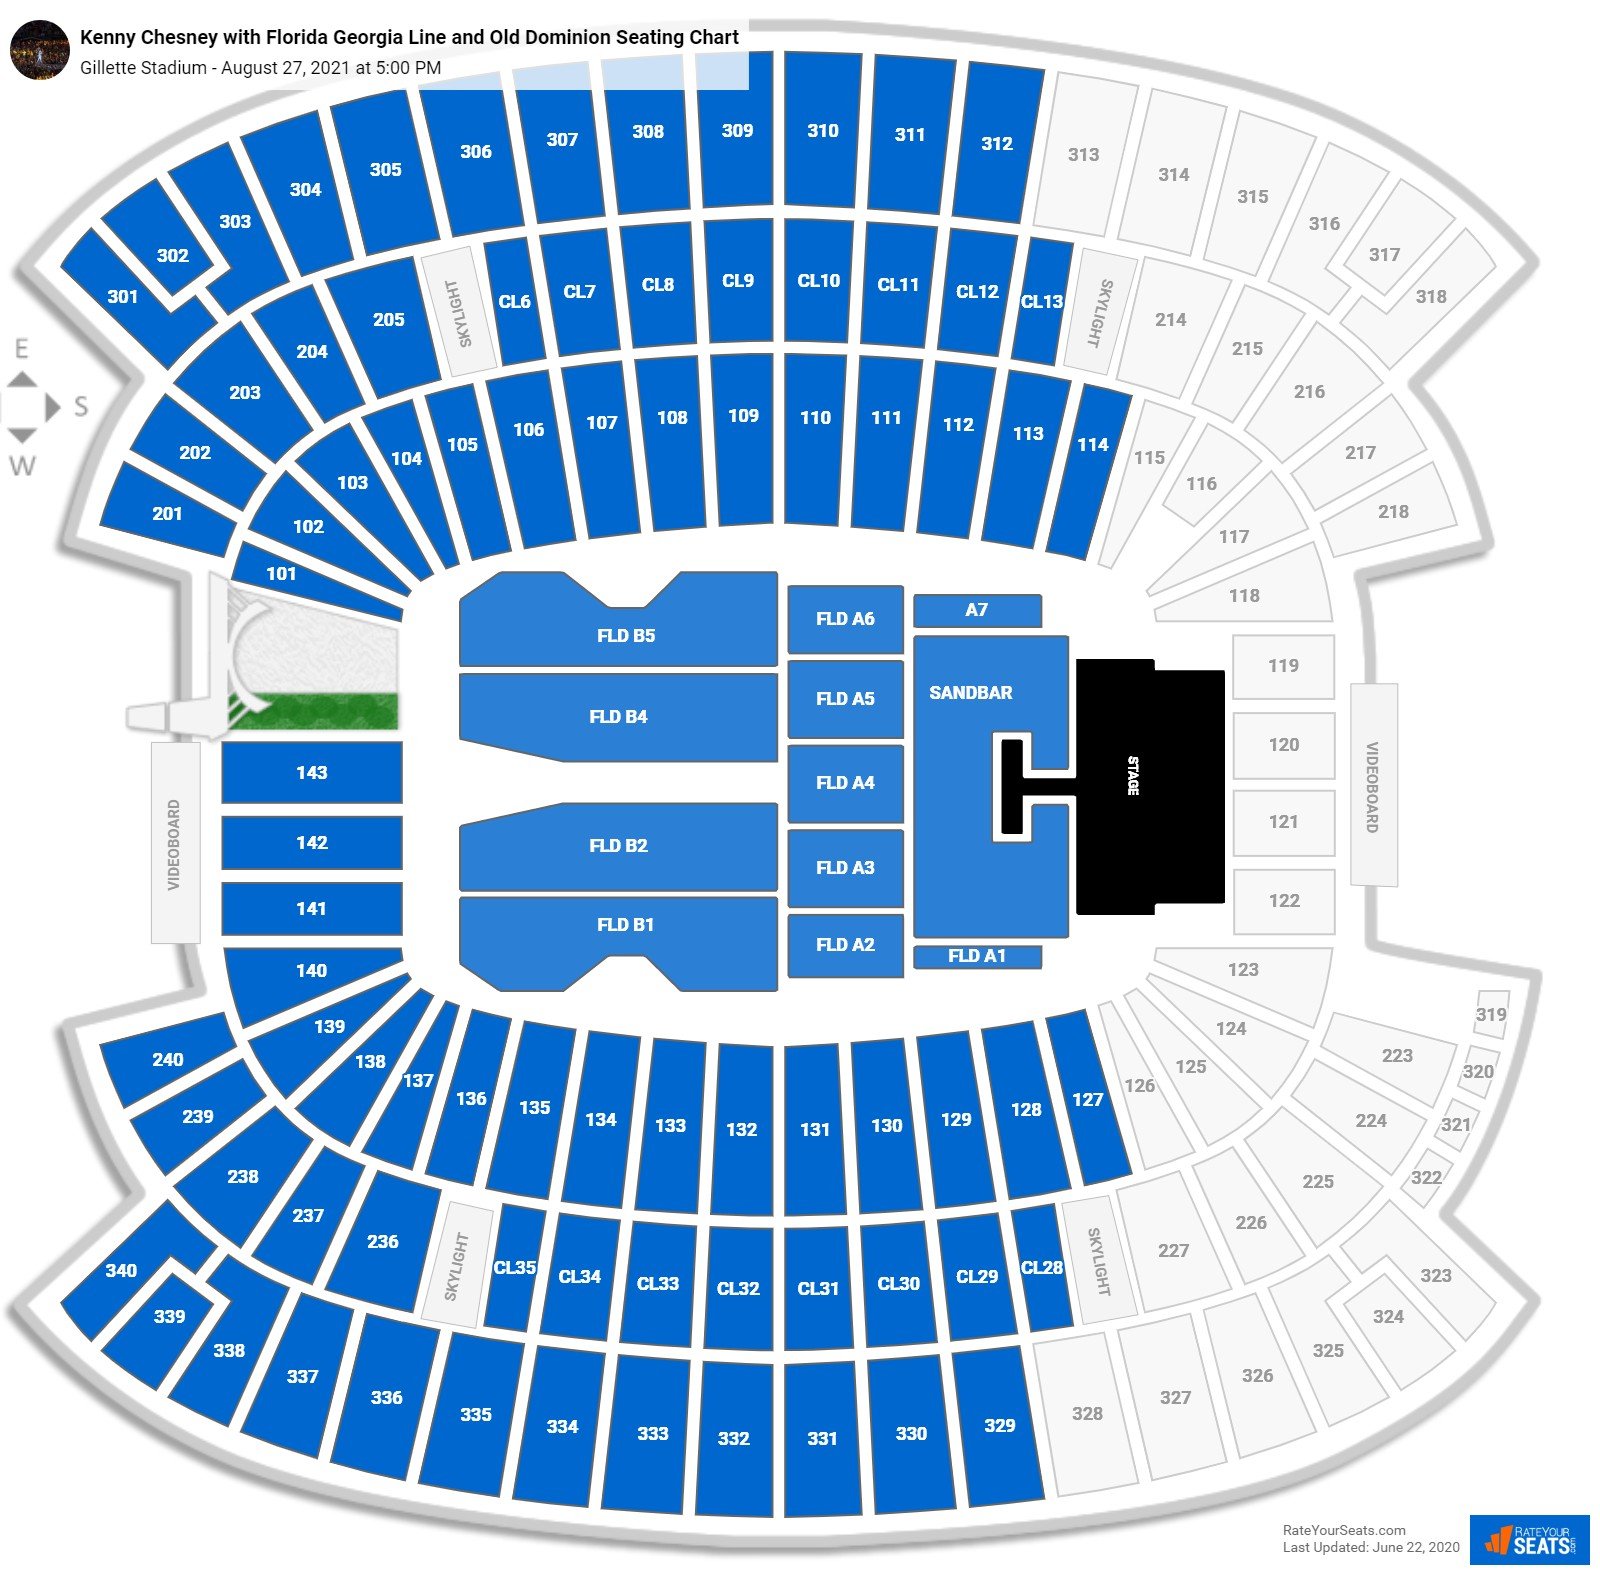 Gillette Stadium Seating Charts for Concerts